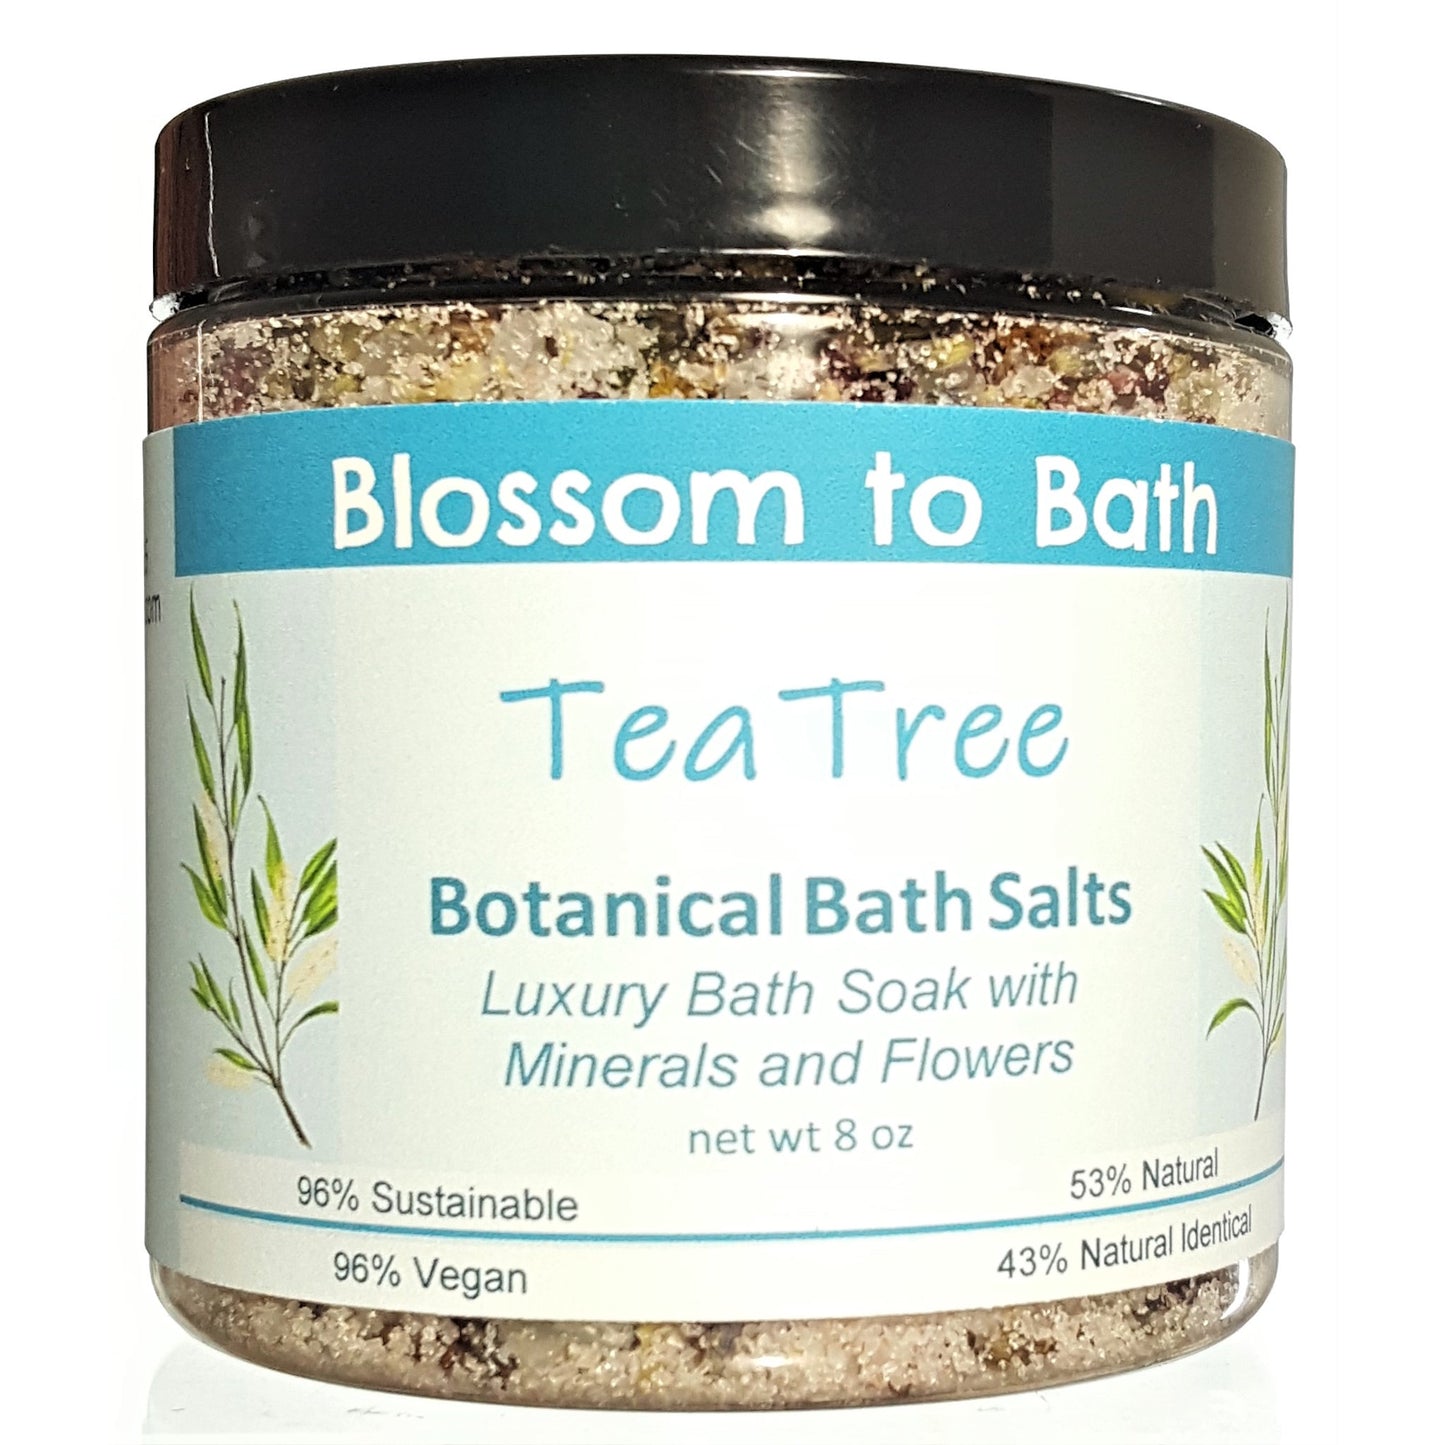 Buy Blossom to Bath Tea Tree Botanical Bath Salts from Flowersong Soap Studio.  A hand selected variety of skin loving botanicals and mineral rich salts for a unique, luxurious soaking experience  Tea tree's fresh fragrance embodies a deep down clean.